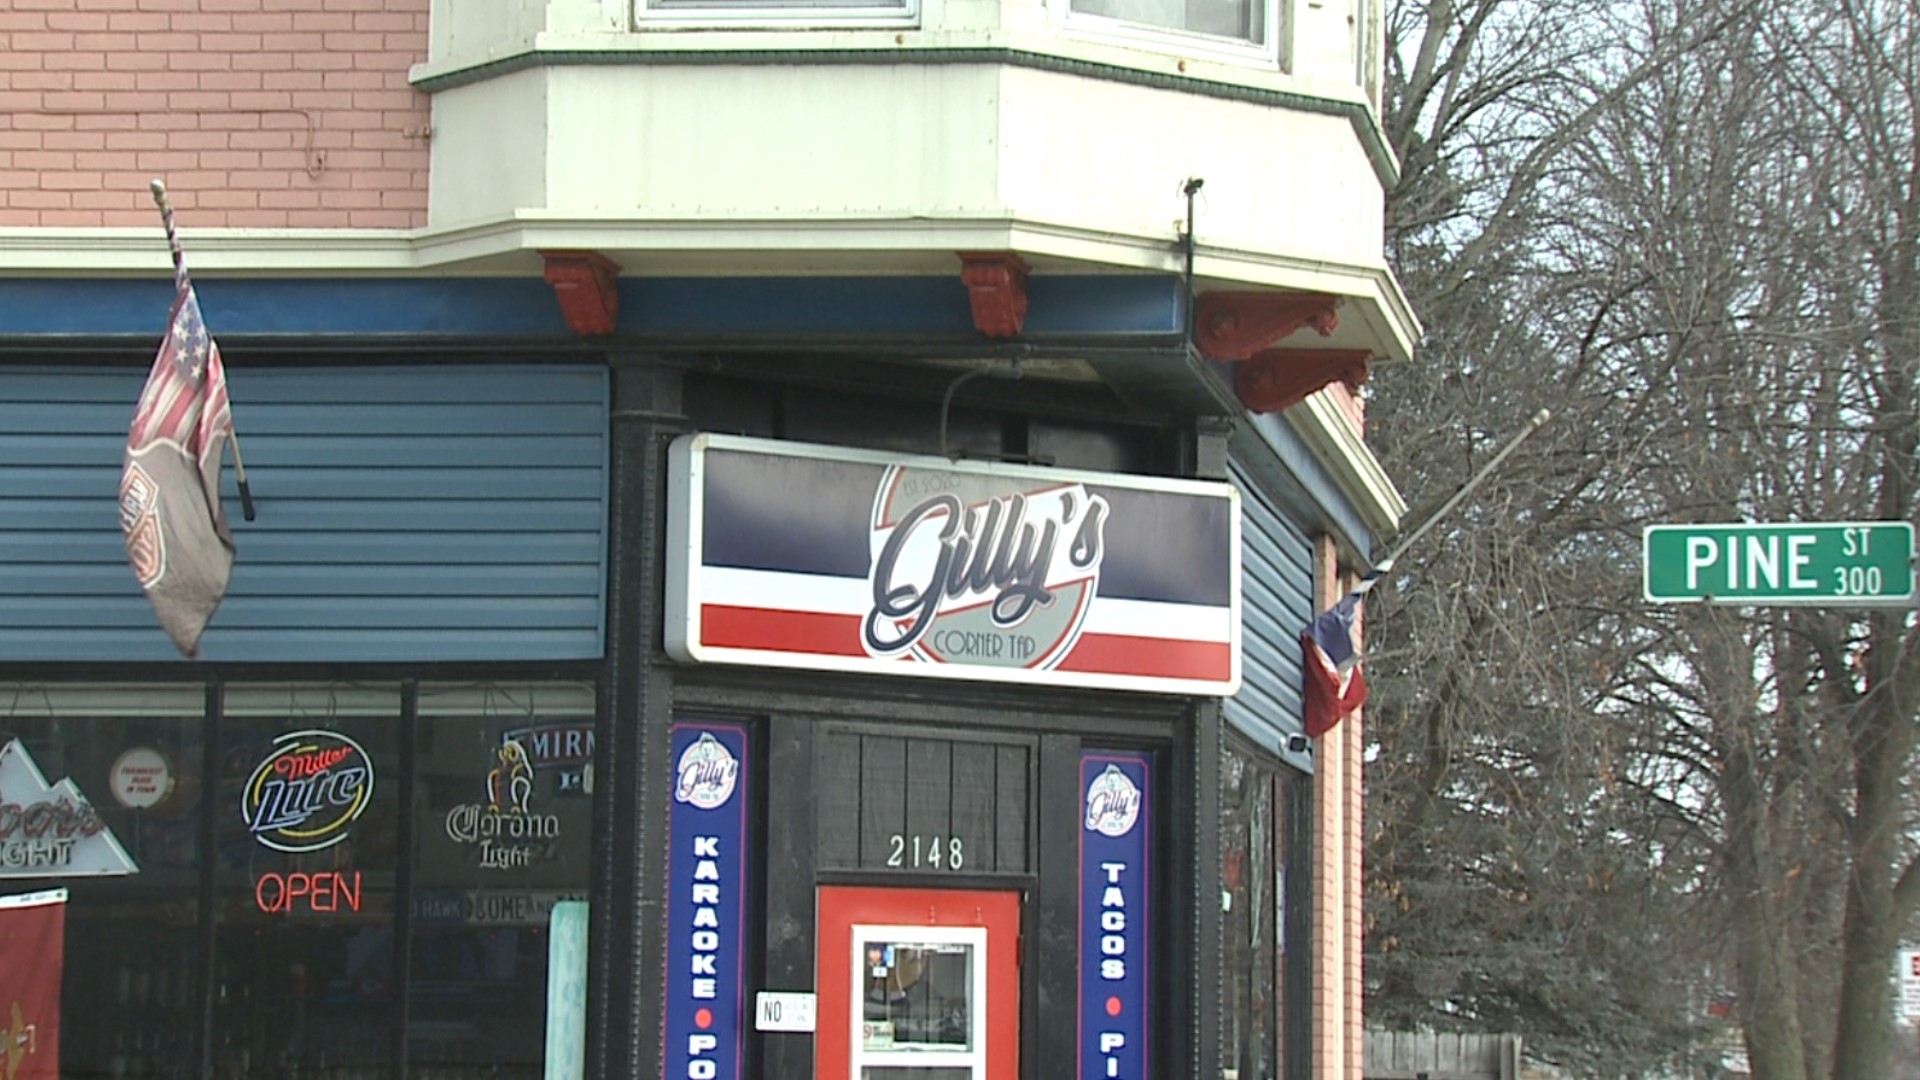 Davenport City Council denied the business liquor license renewal after a shooting near the bar left one person dead.